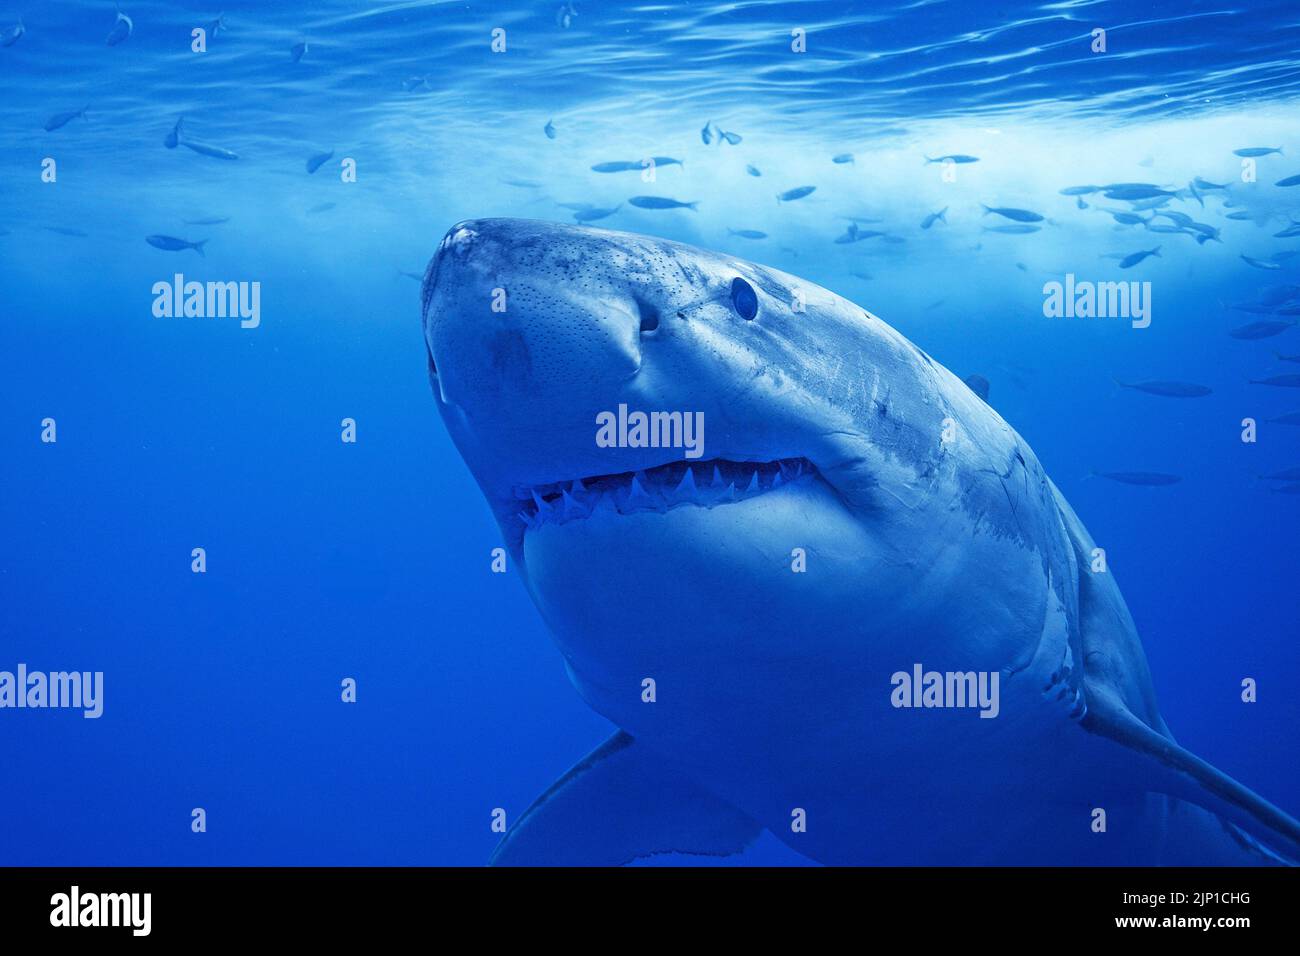 Great white shark (Carcharodon carcharias) in blue water, Guadalupe Island, Mexico, Pacific Ocean Stock Photo